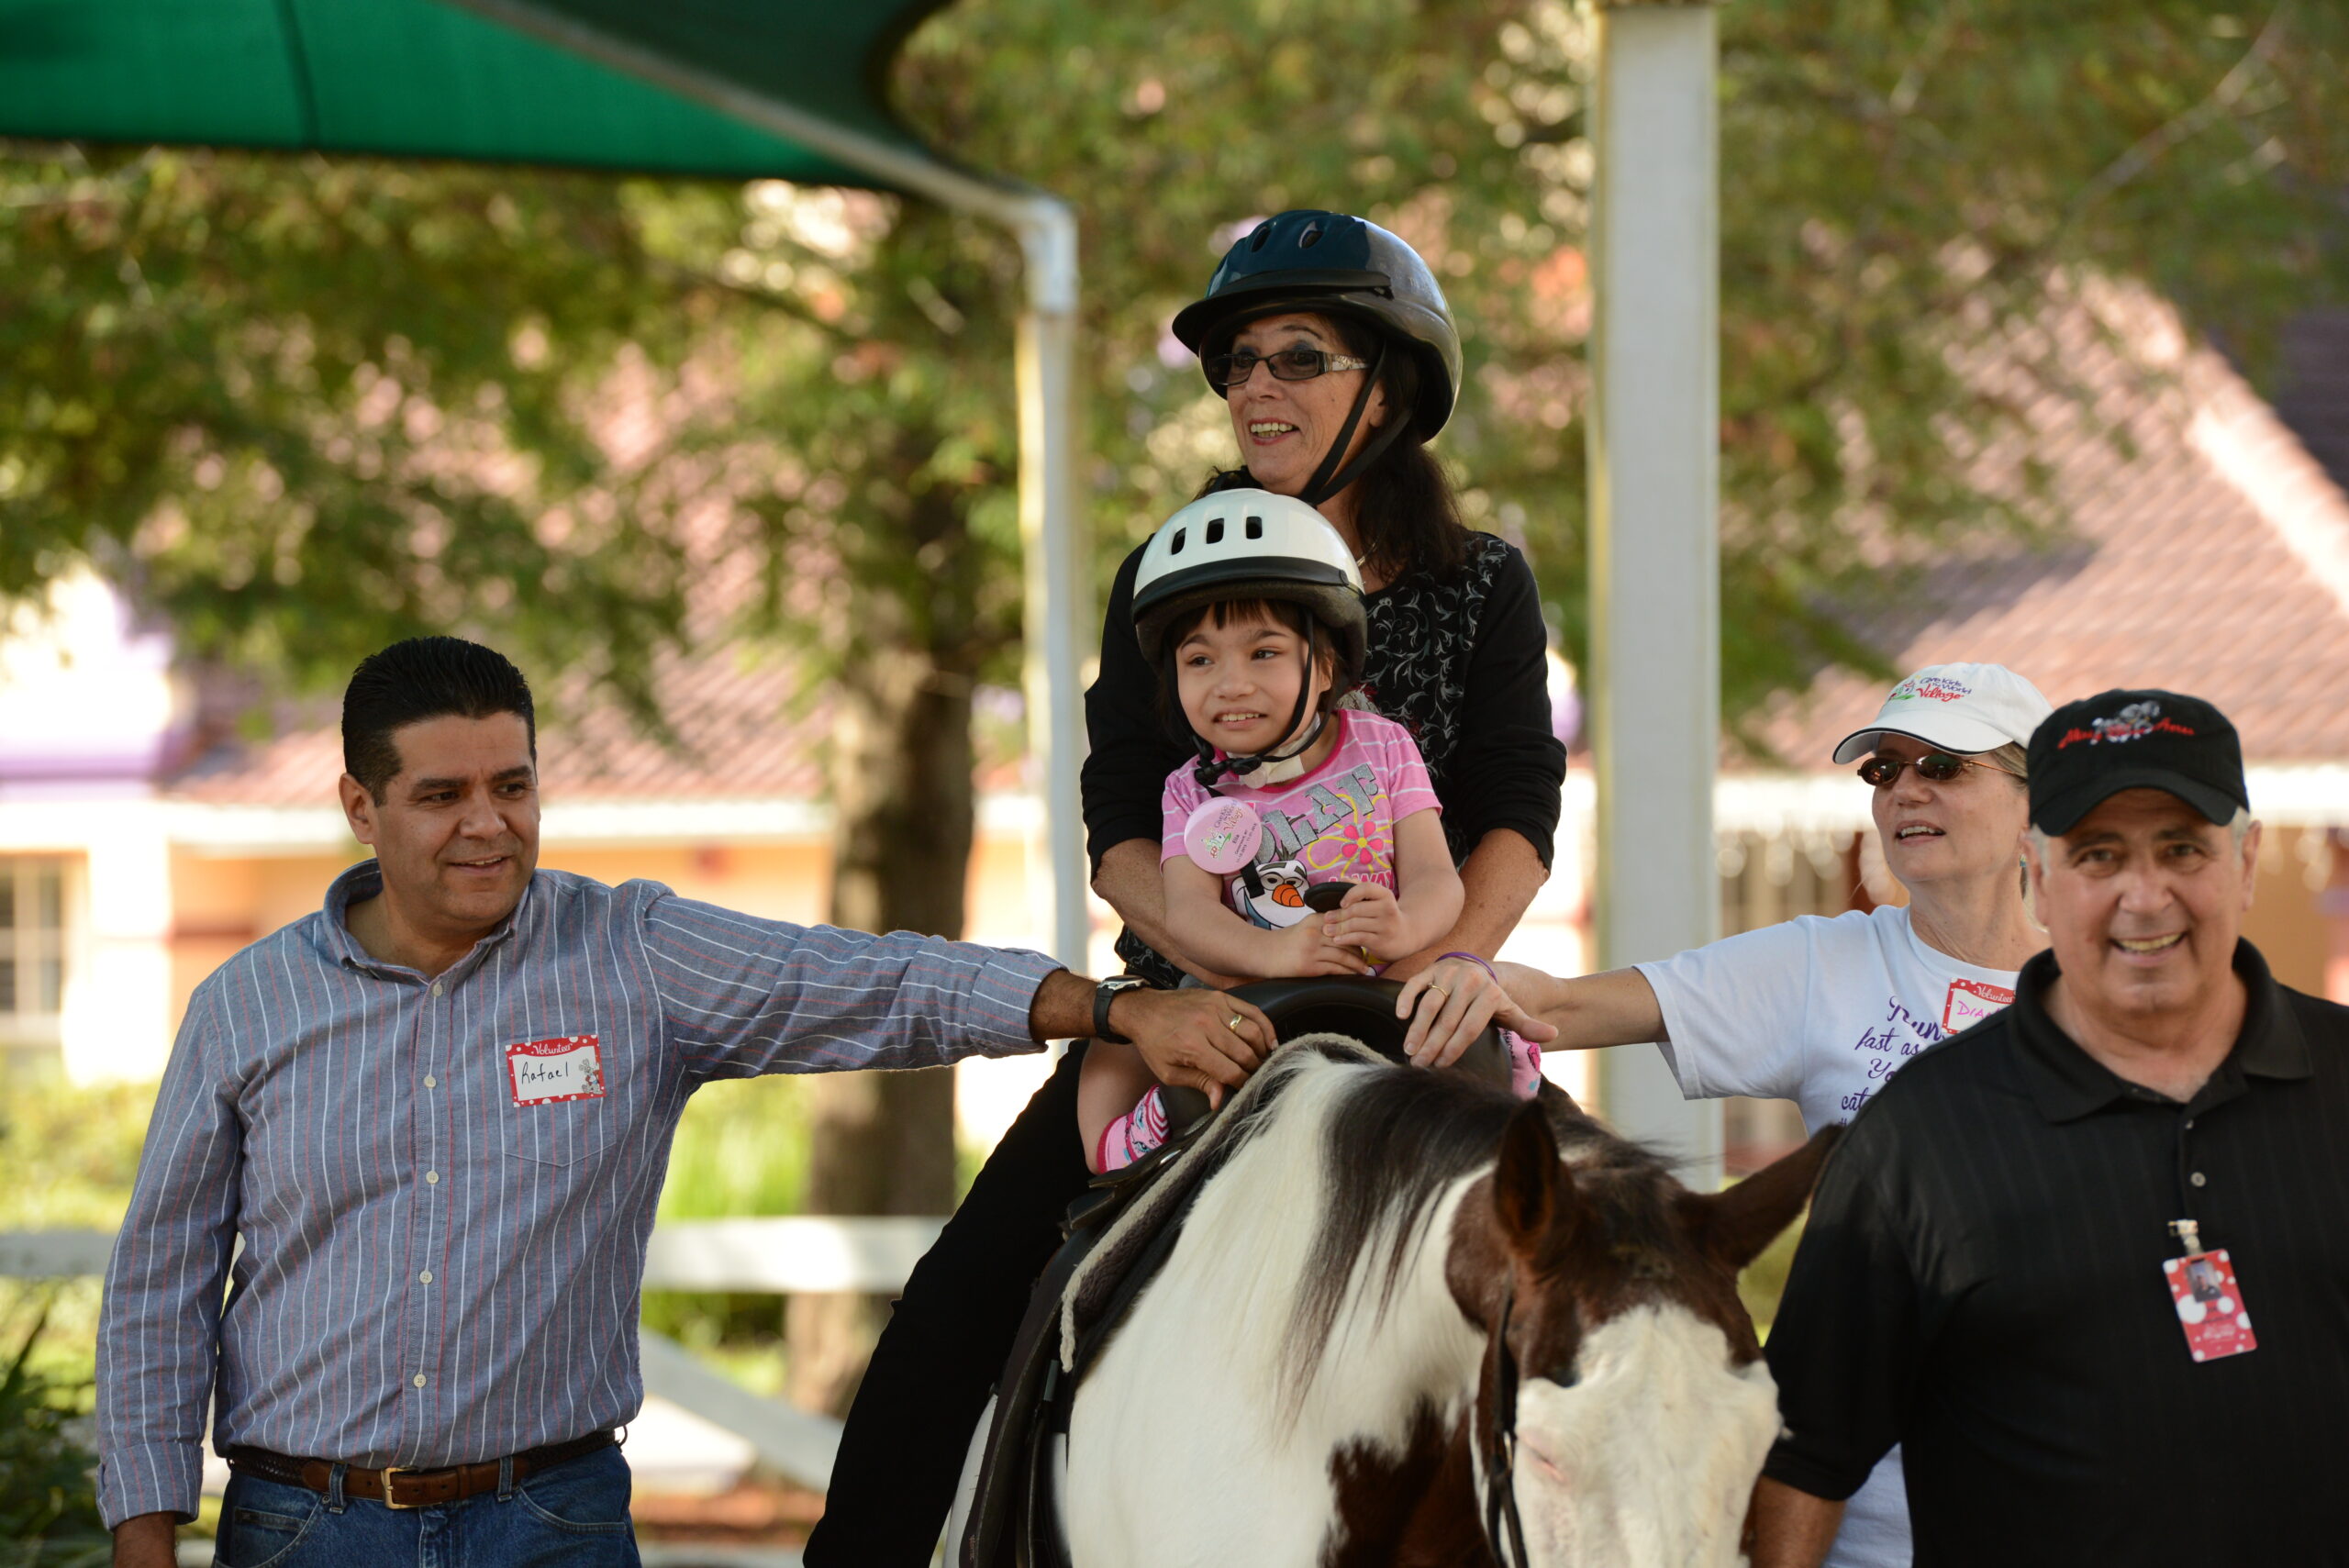 Child with helmet rides horse at Give Kids The World; money raised at truck pull fundraiser supports the attraction